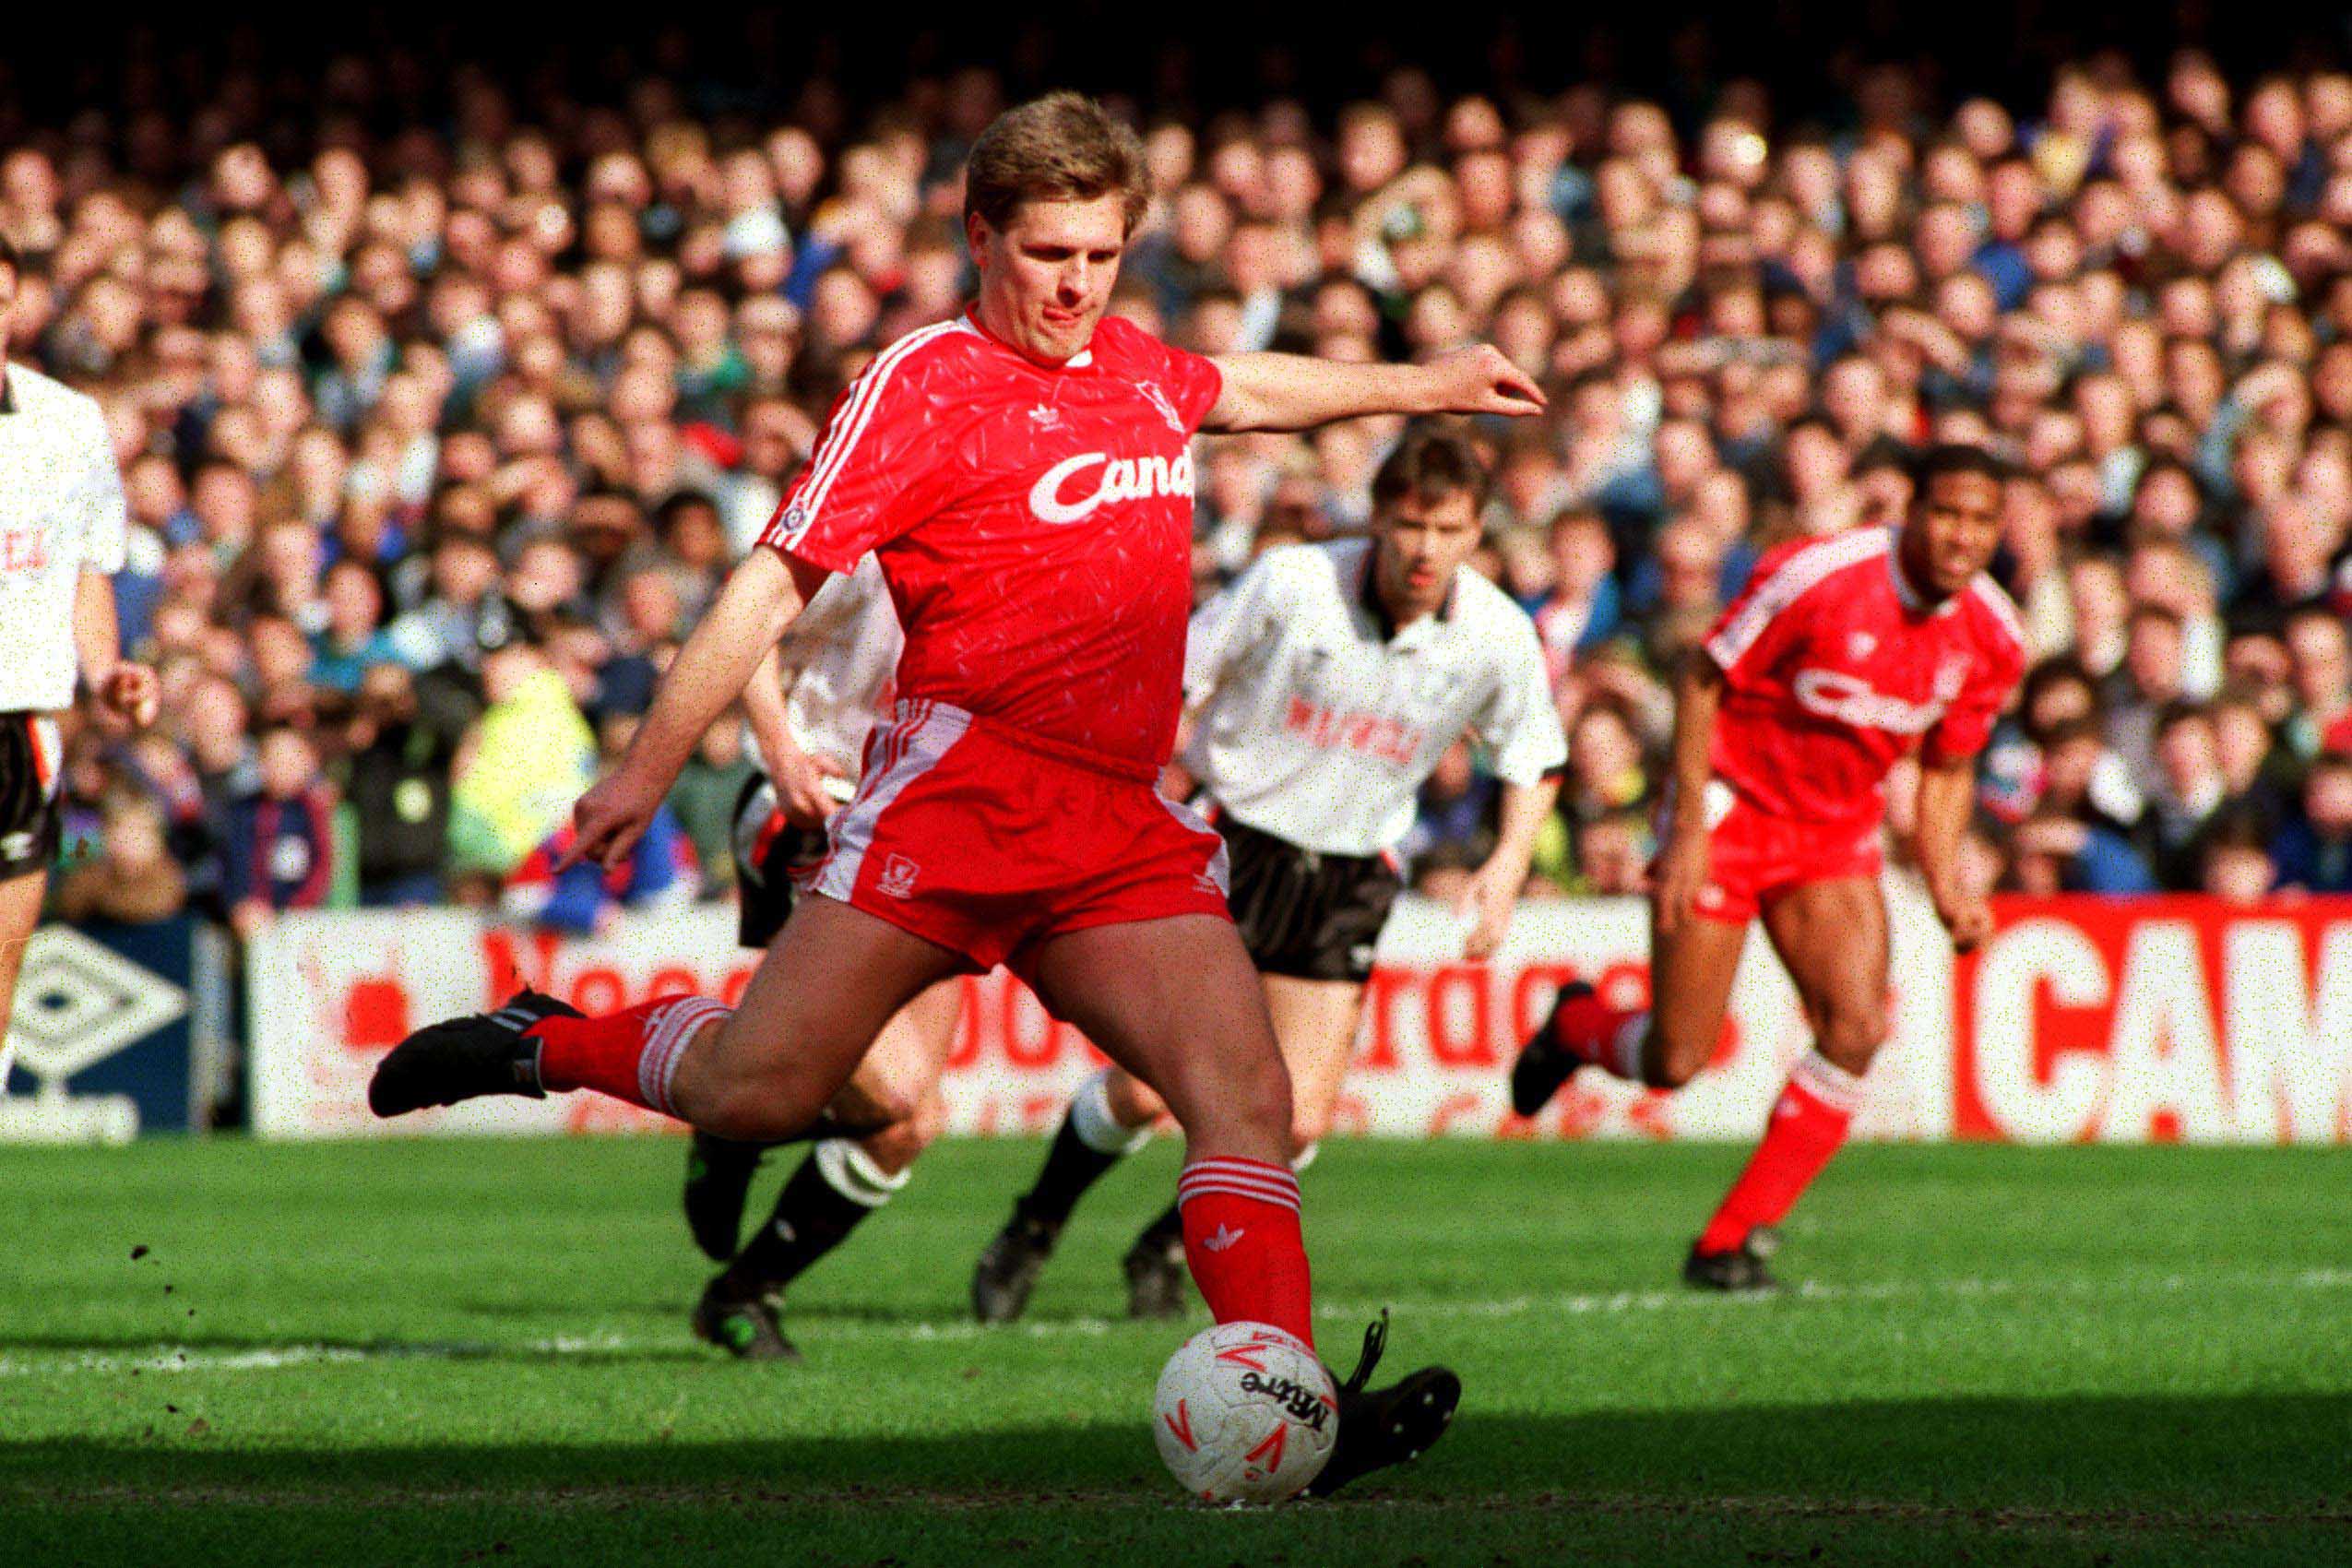 JAN MOLBY: WORTH HIS WEIGHT IN GOLD - The Anfield Wrap